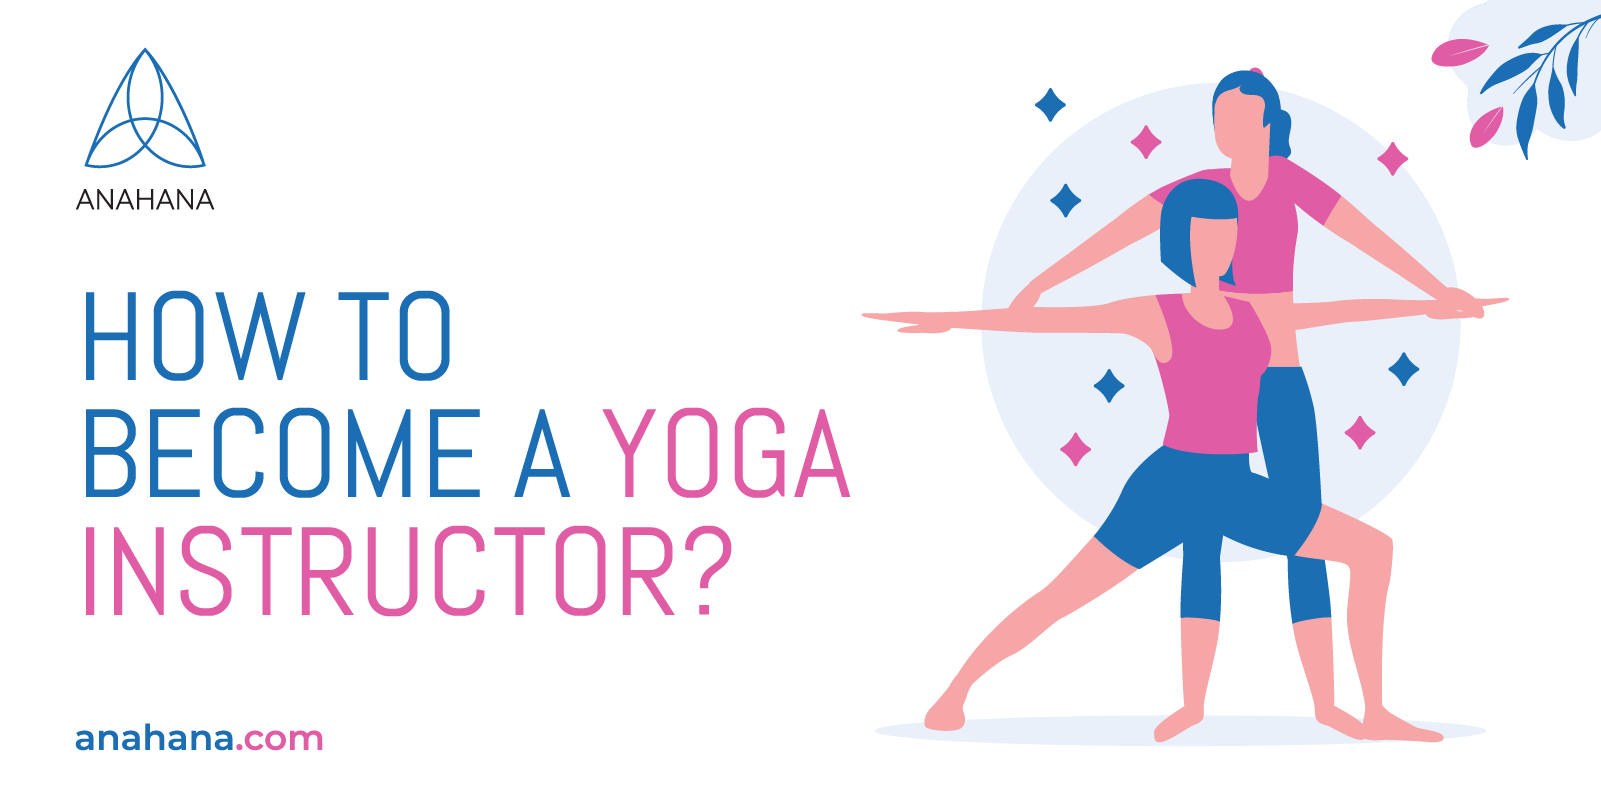 How Long Does It Take To Become a Yoga Instructor?